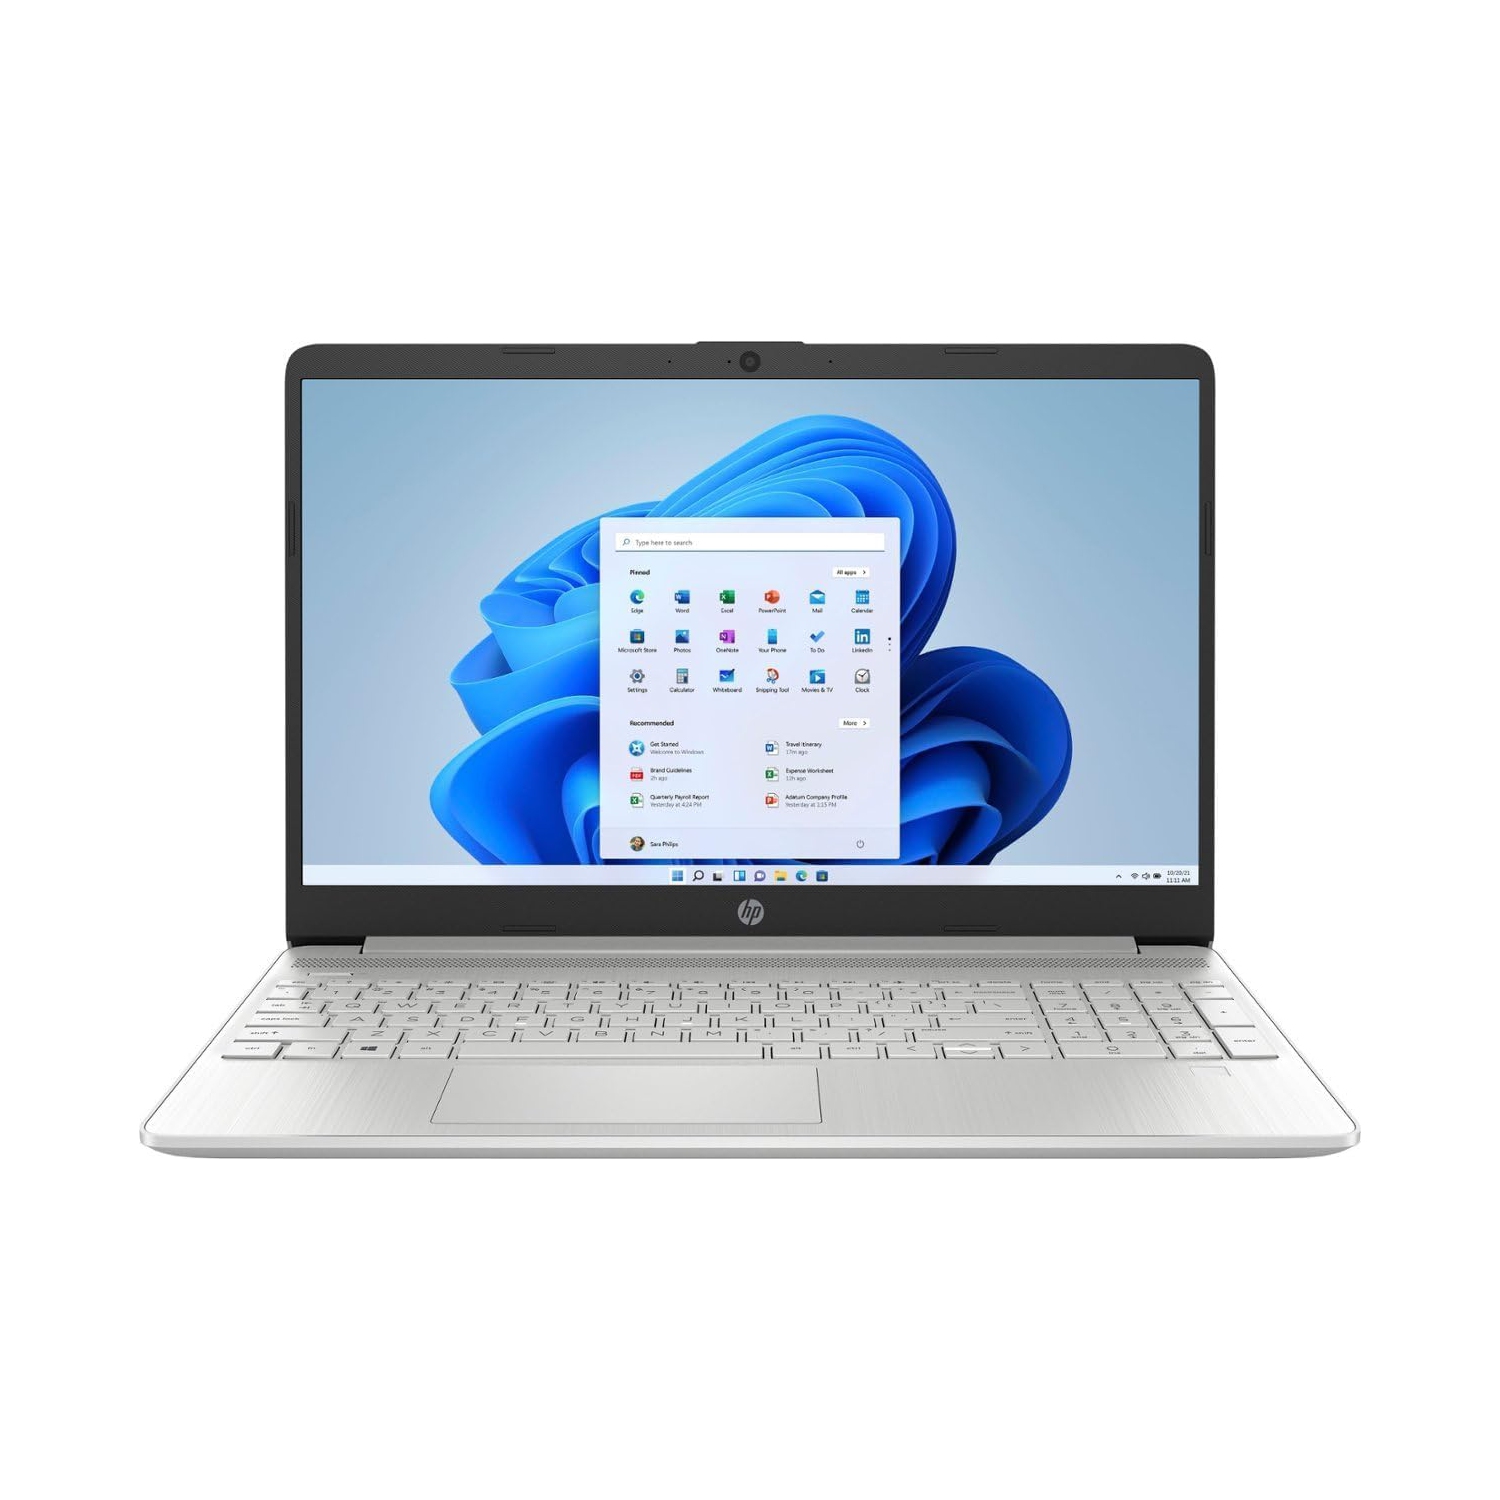 HP - 15.6" Touch-Screen Laptop - Intel Core 6-Core i3 -1215u Up to 4.4GHz - 32GB Memory - 1TB SSD - Natural Silver, Intel UHD Graphics, Fingerprint Reader, Windows 11 Home